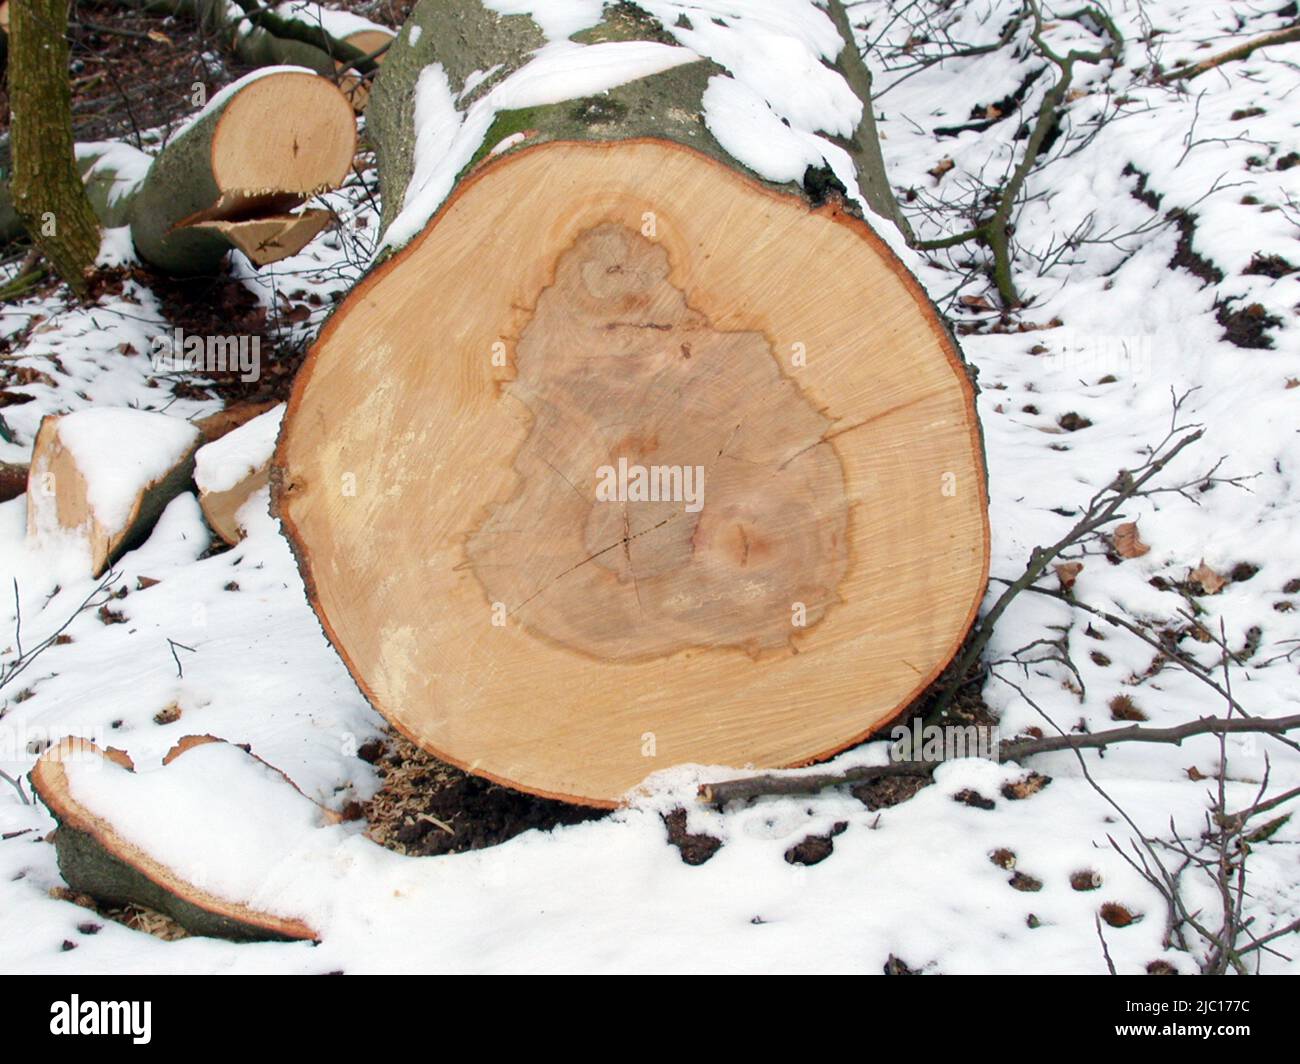 common beech (Fagus sylvatica), wood, cut down trunk in winter, Germany Stock Photo